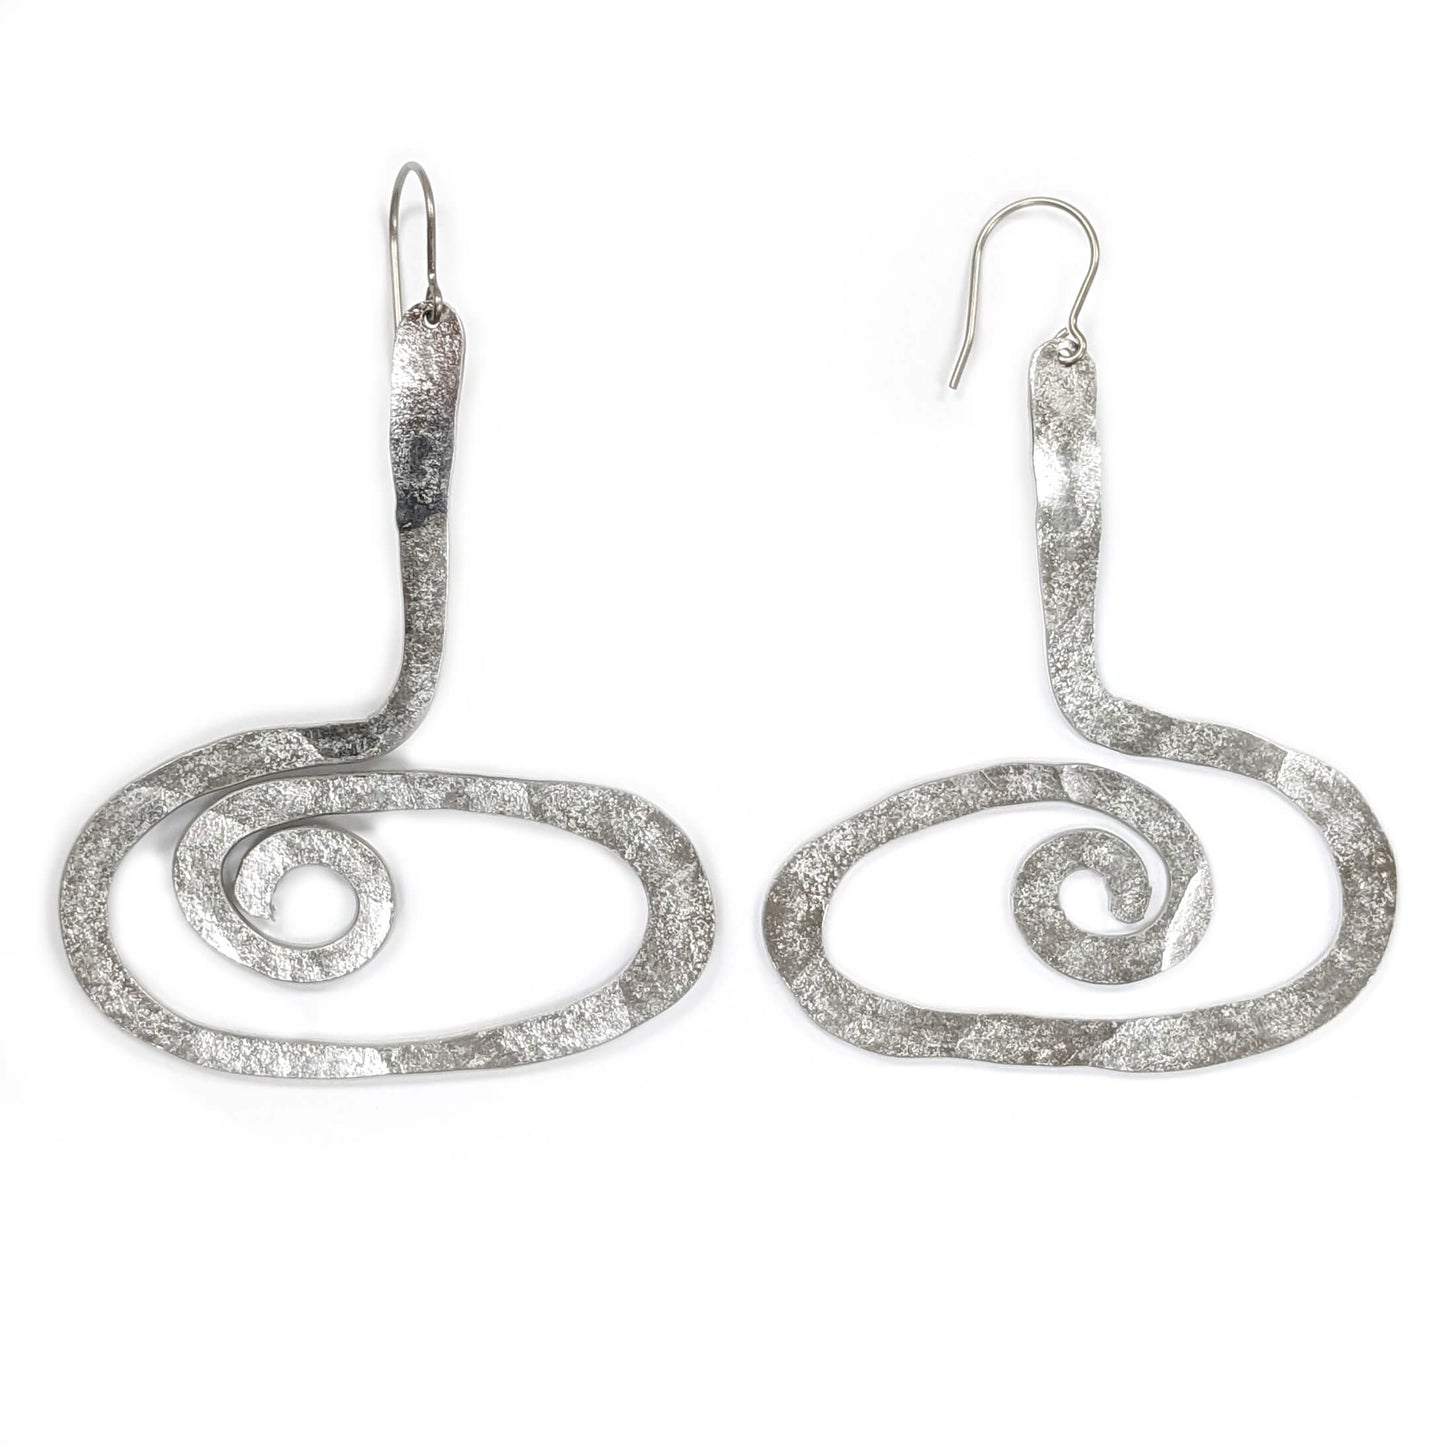 Large "Swiggle" Earrings by Catherine Butler- Spiral Drop